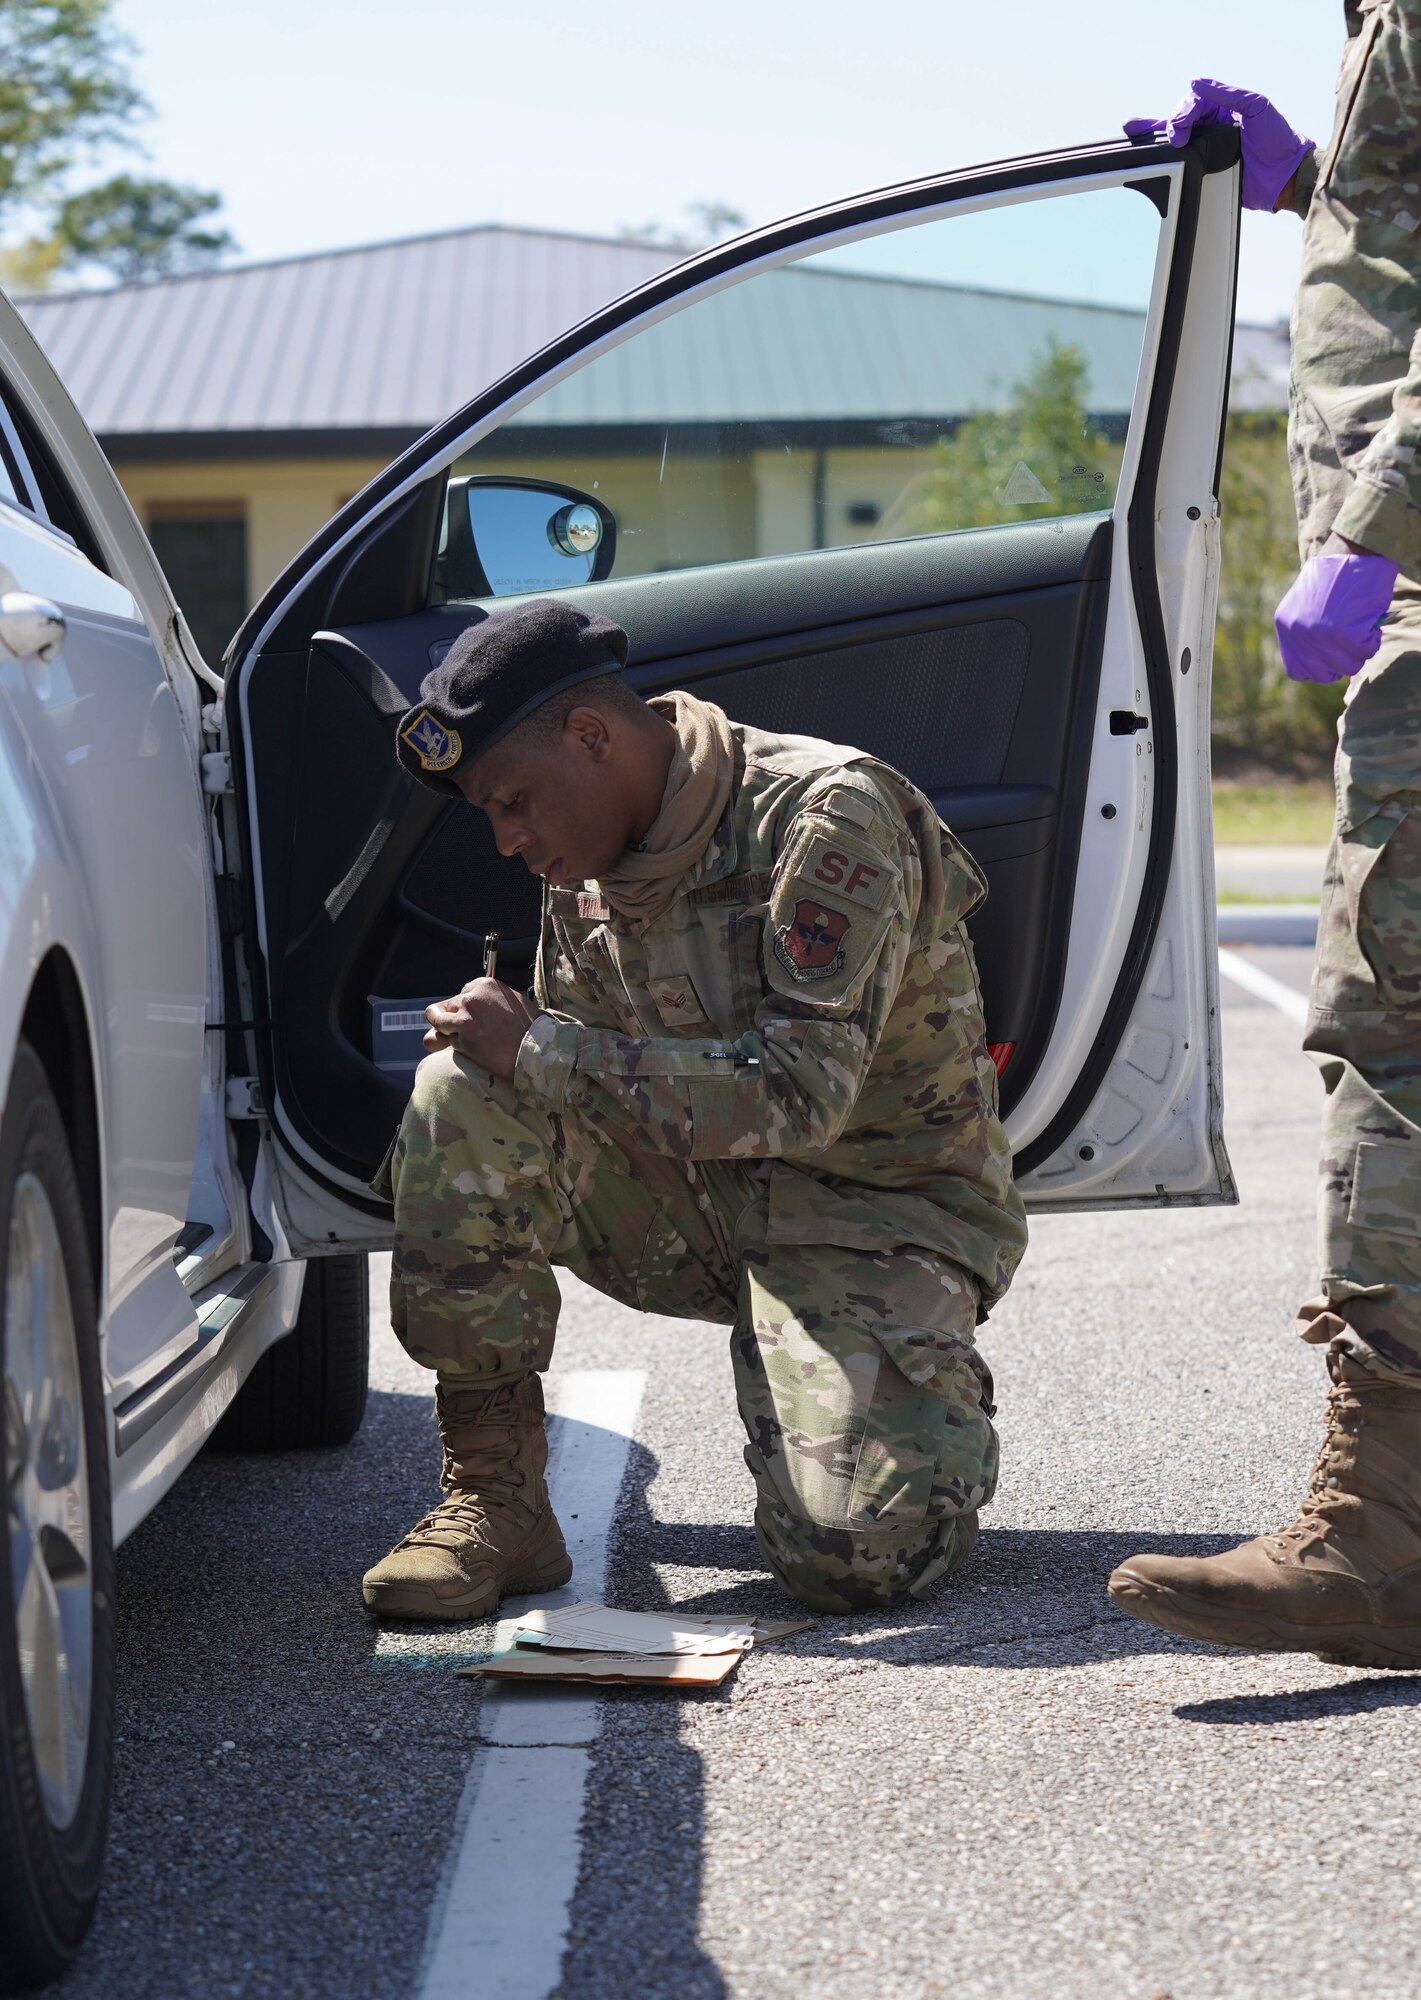 U.S. Air Force Senior Airman Darian Brown, 81st Security Forces Squadron patrolman, examines evidence in a mock crime scene at Keesler Air Force Base, Mississippi, March 28, 2022. Brown participated in this training to improve his skills as a security forces member in the event he was called for a court martial. (U.S. Air Force photo by Airman 1st Class Elizabeth Davis)